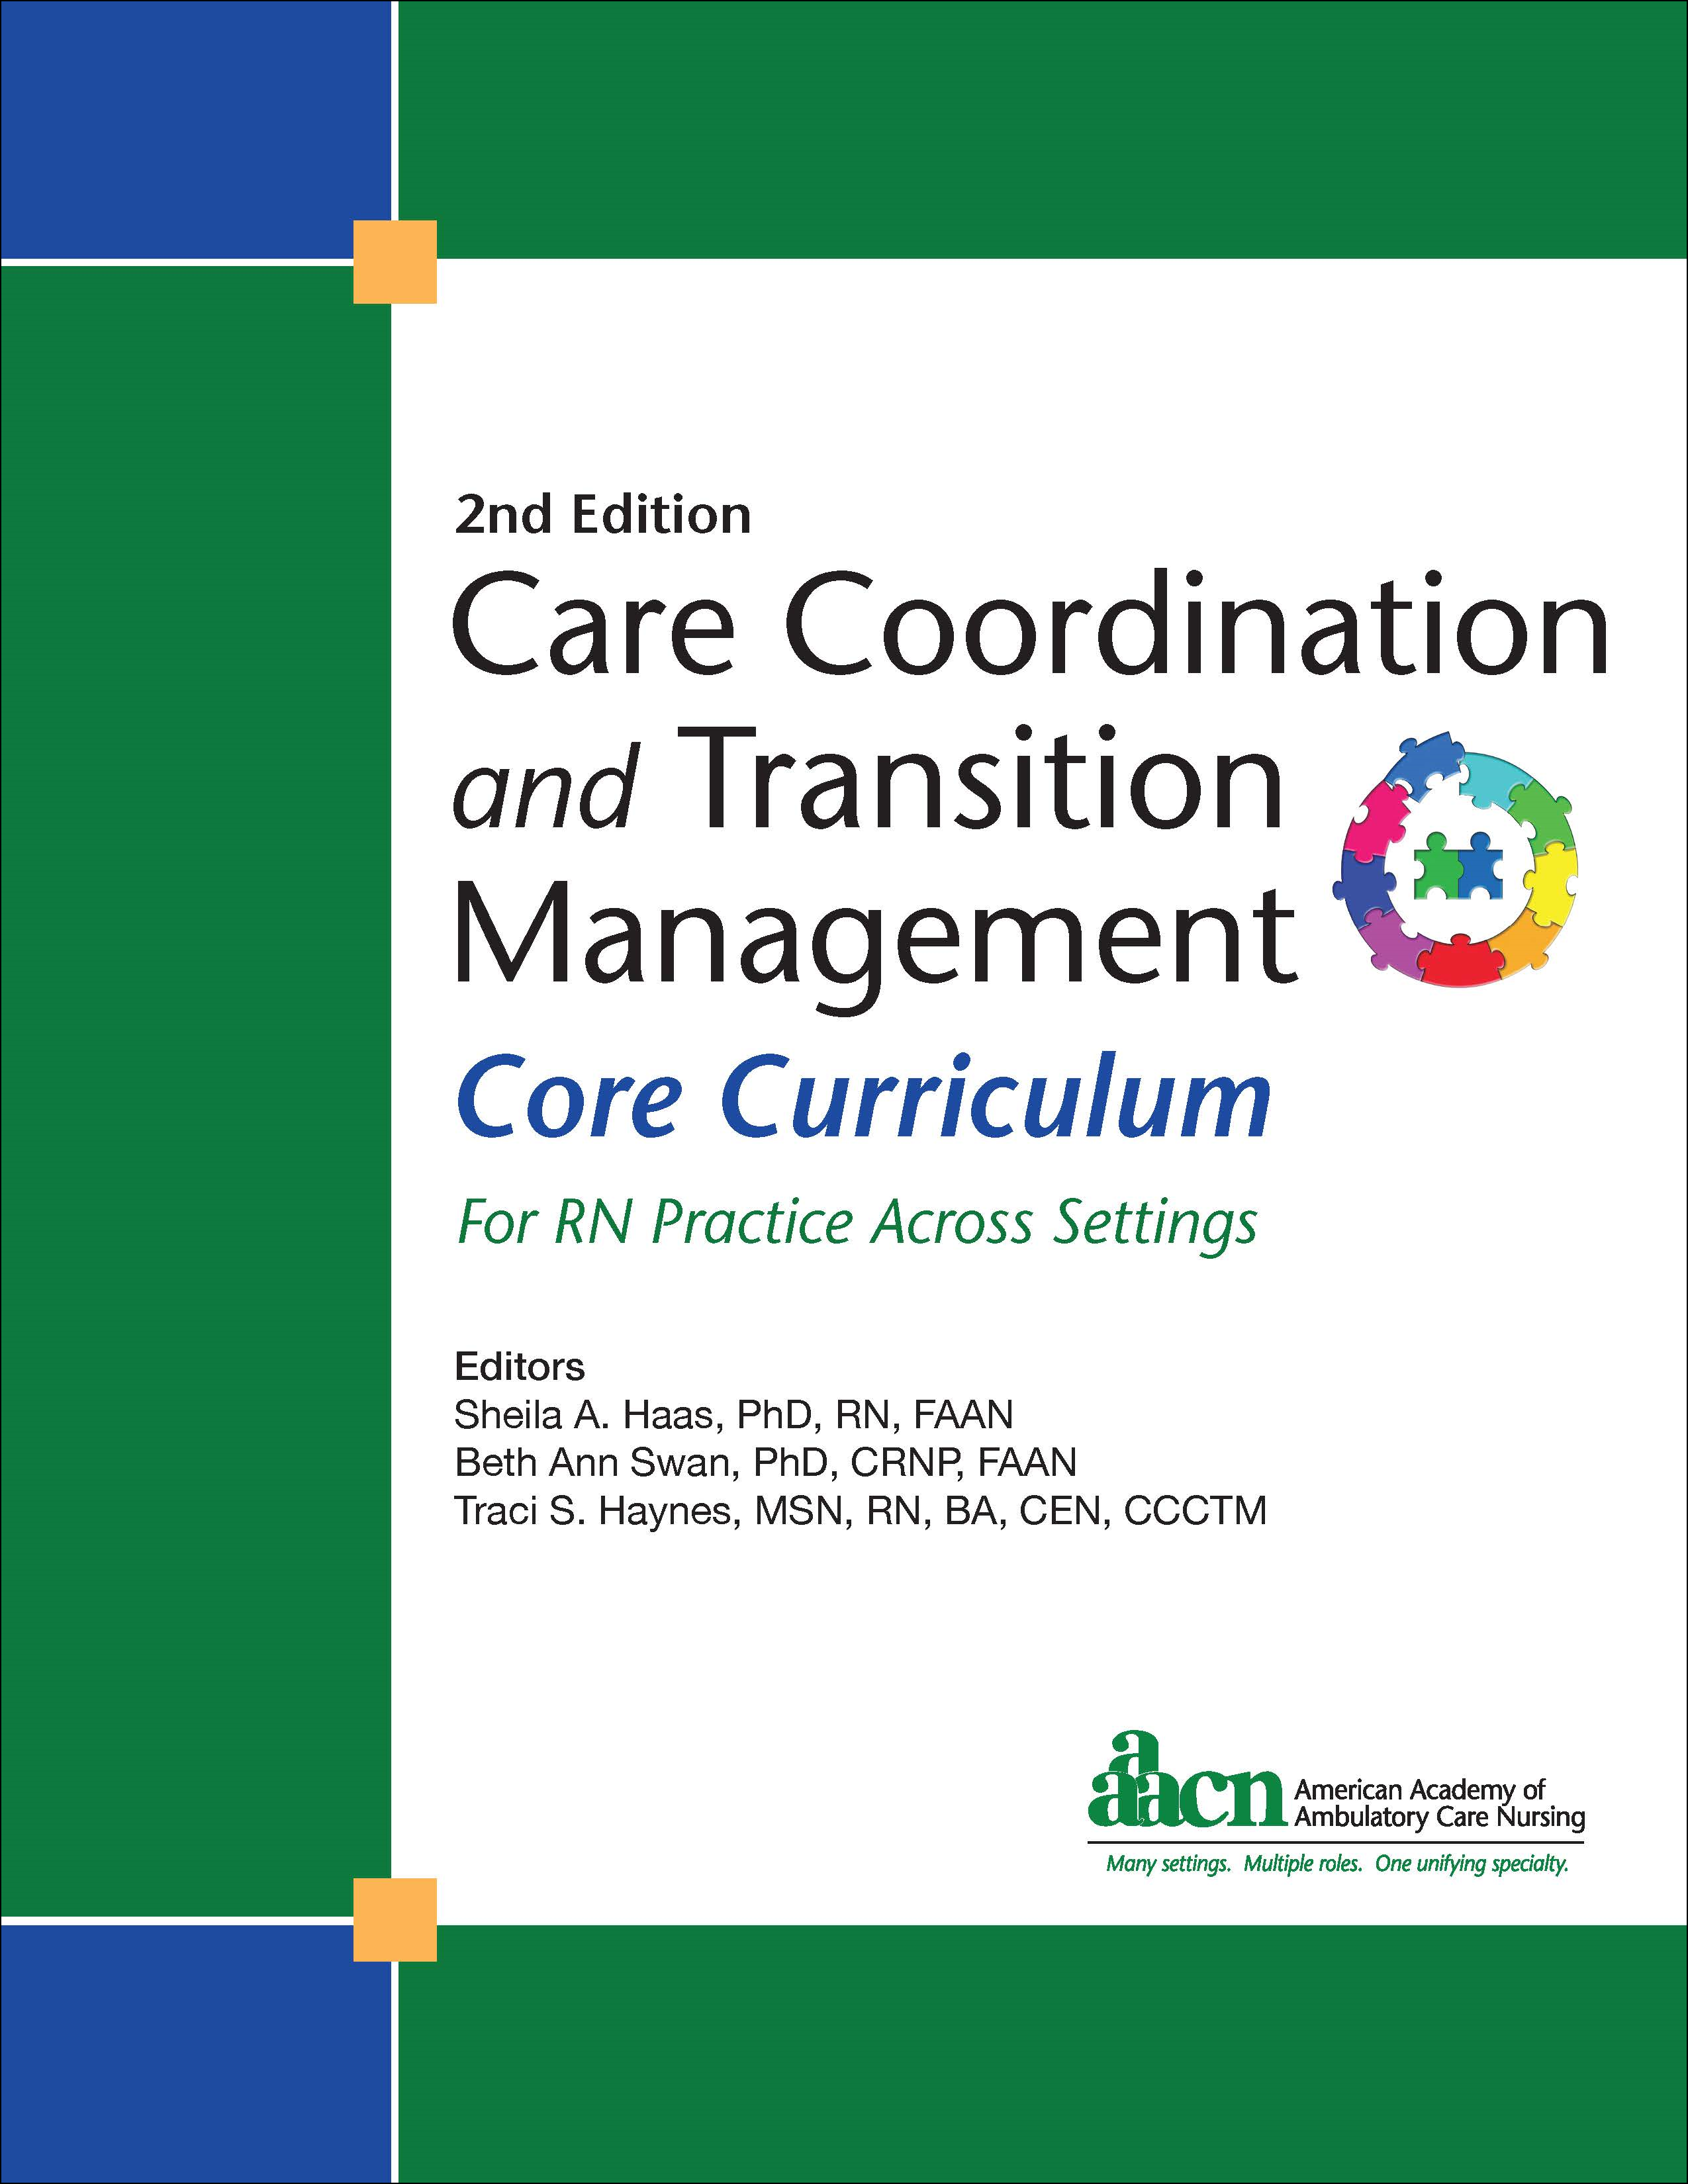 Care Coordination and Transition Management (CCTM) Core Curriculum eBook